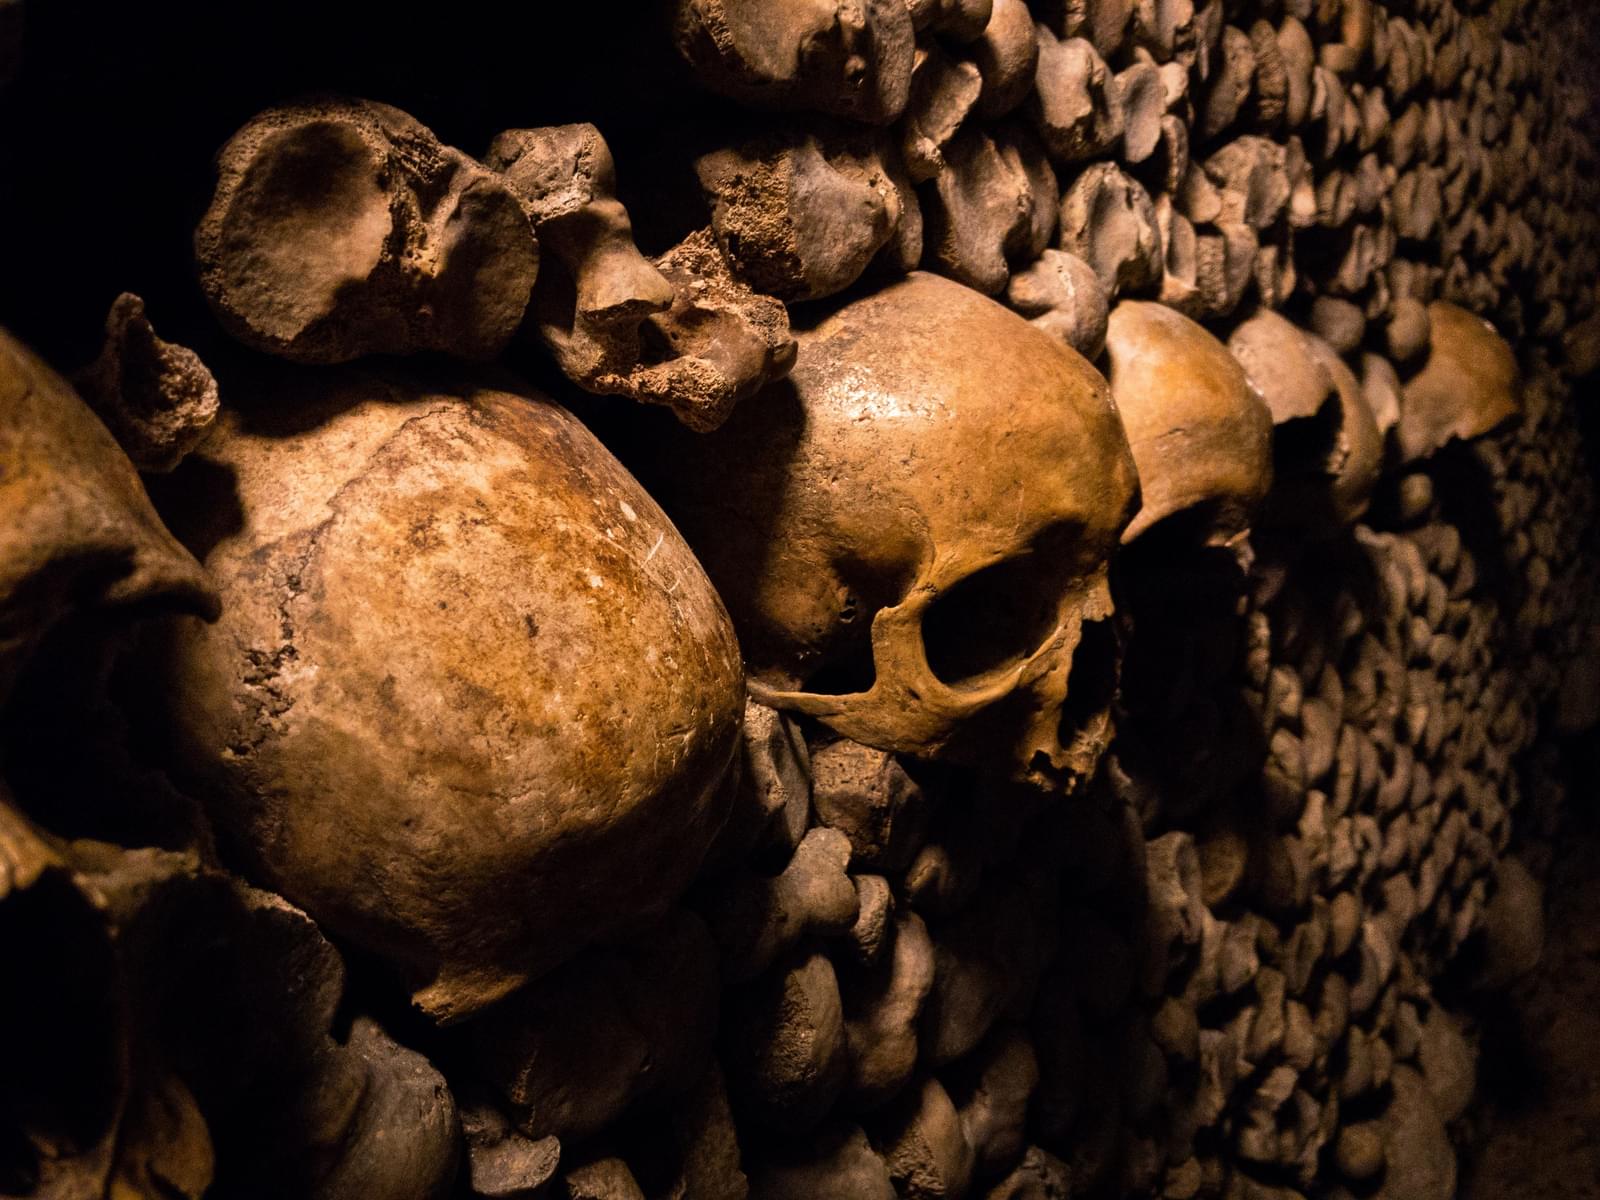 Visit The Catacombs At Night